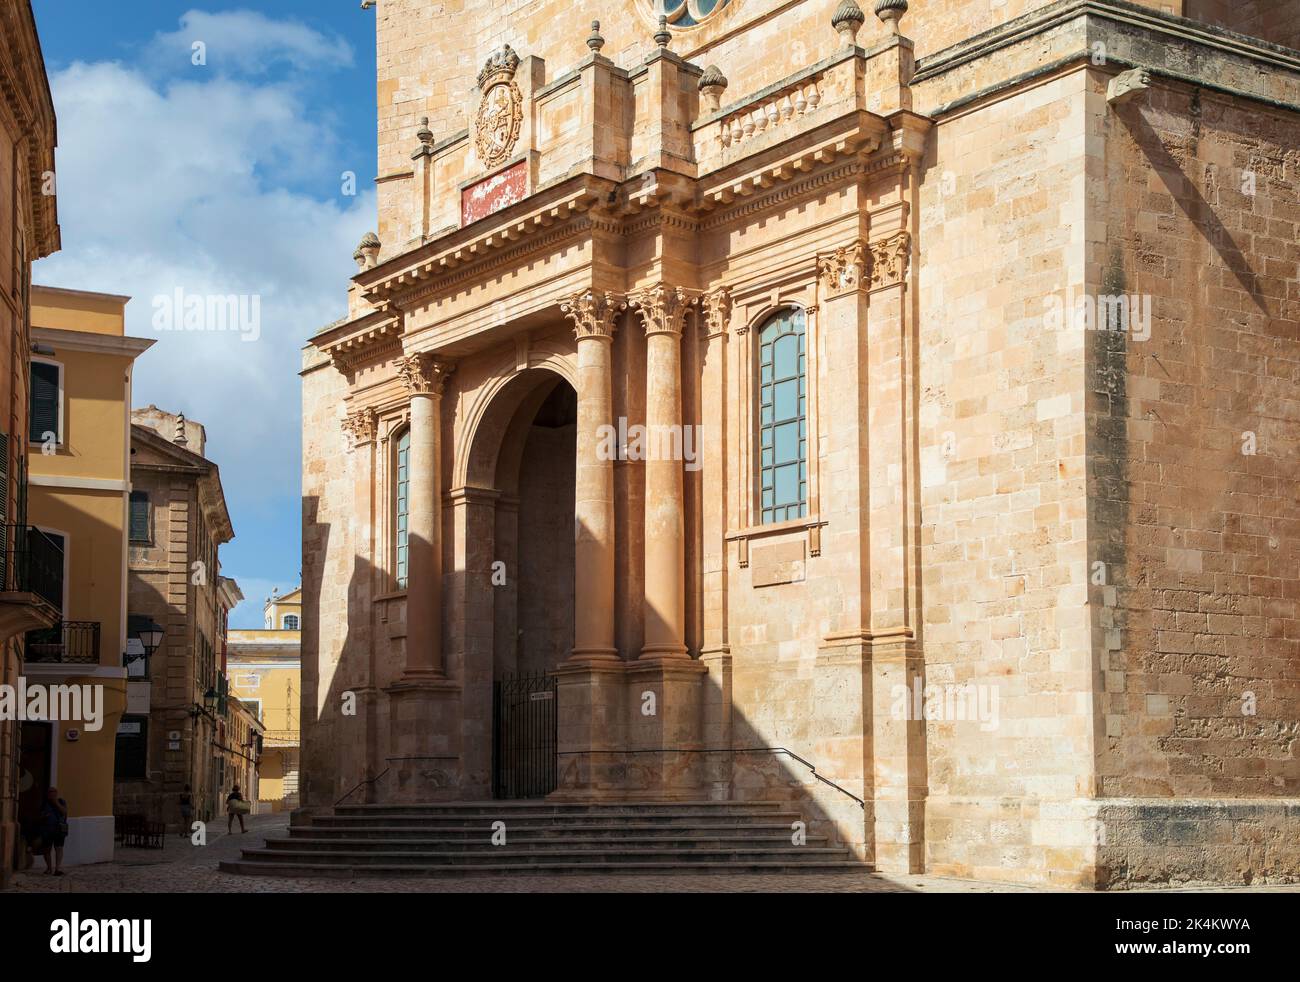 Ciutadella, Spain - September 6th, 2022: The Cathedral of Santa María de Ciutadella is one of the architectural highlights of the Balearic Islands Stock Photo